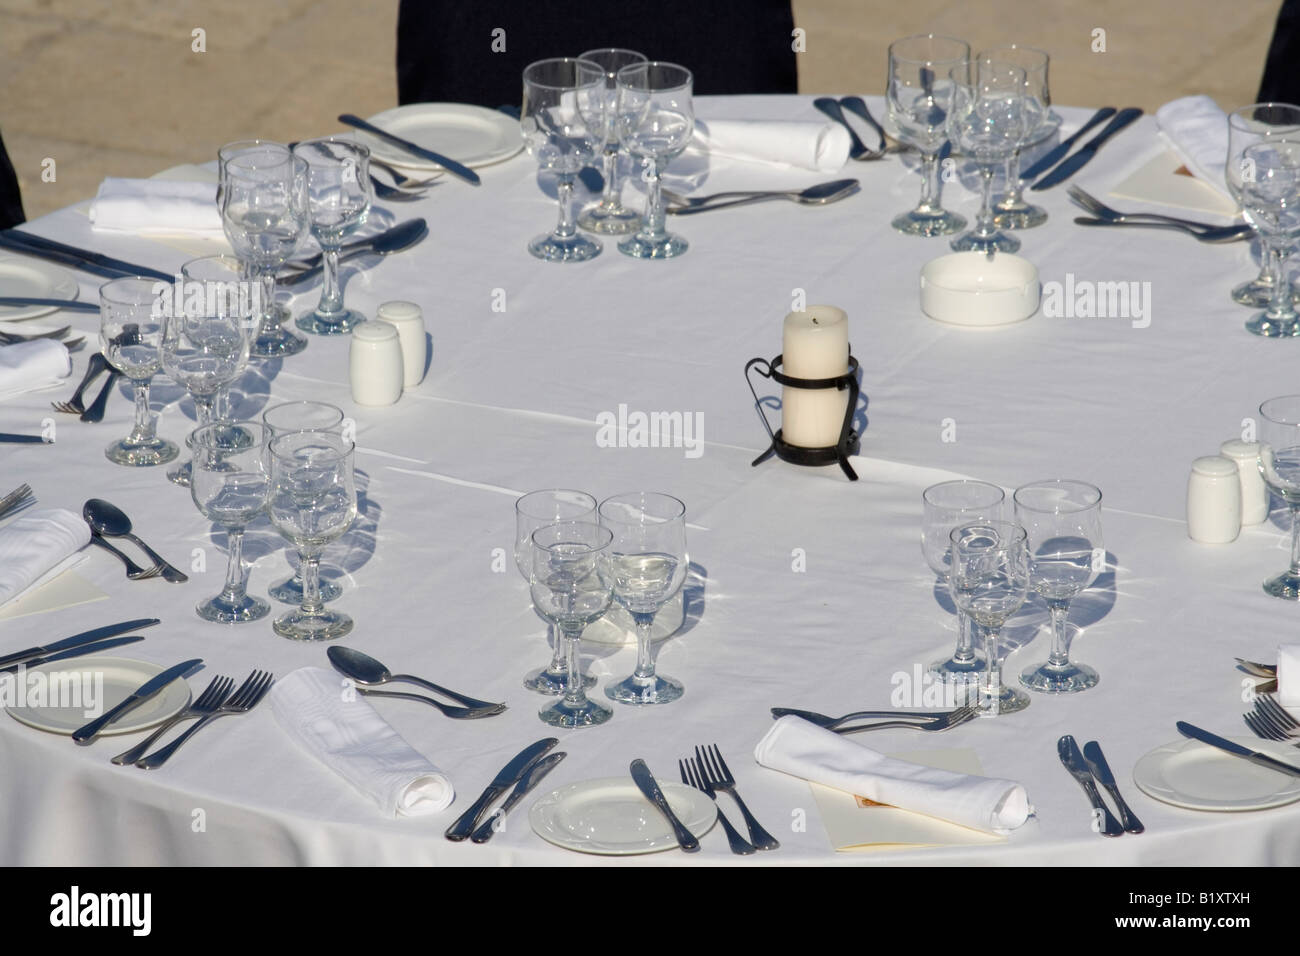 Dinner table arrangement set for guests Stock Photo